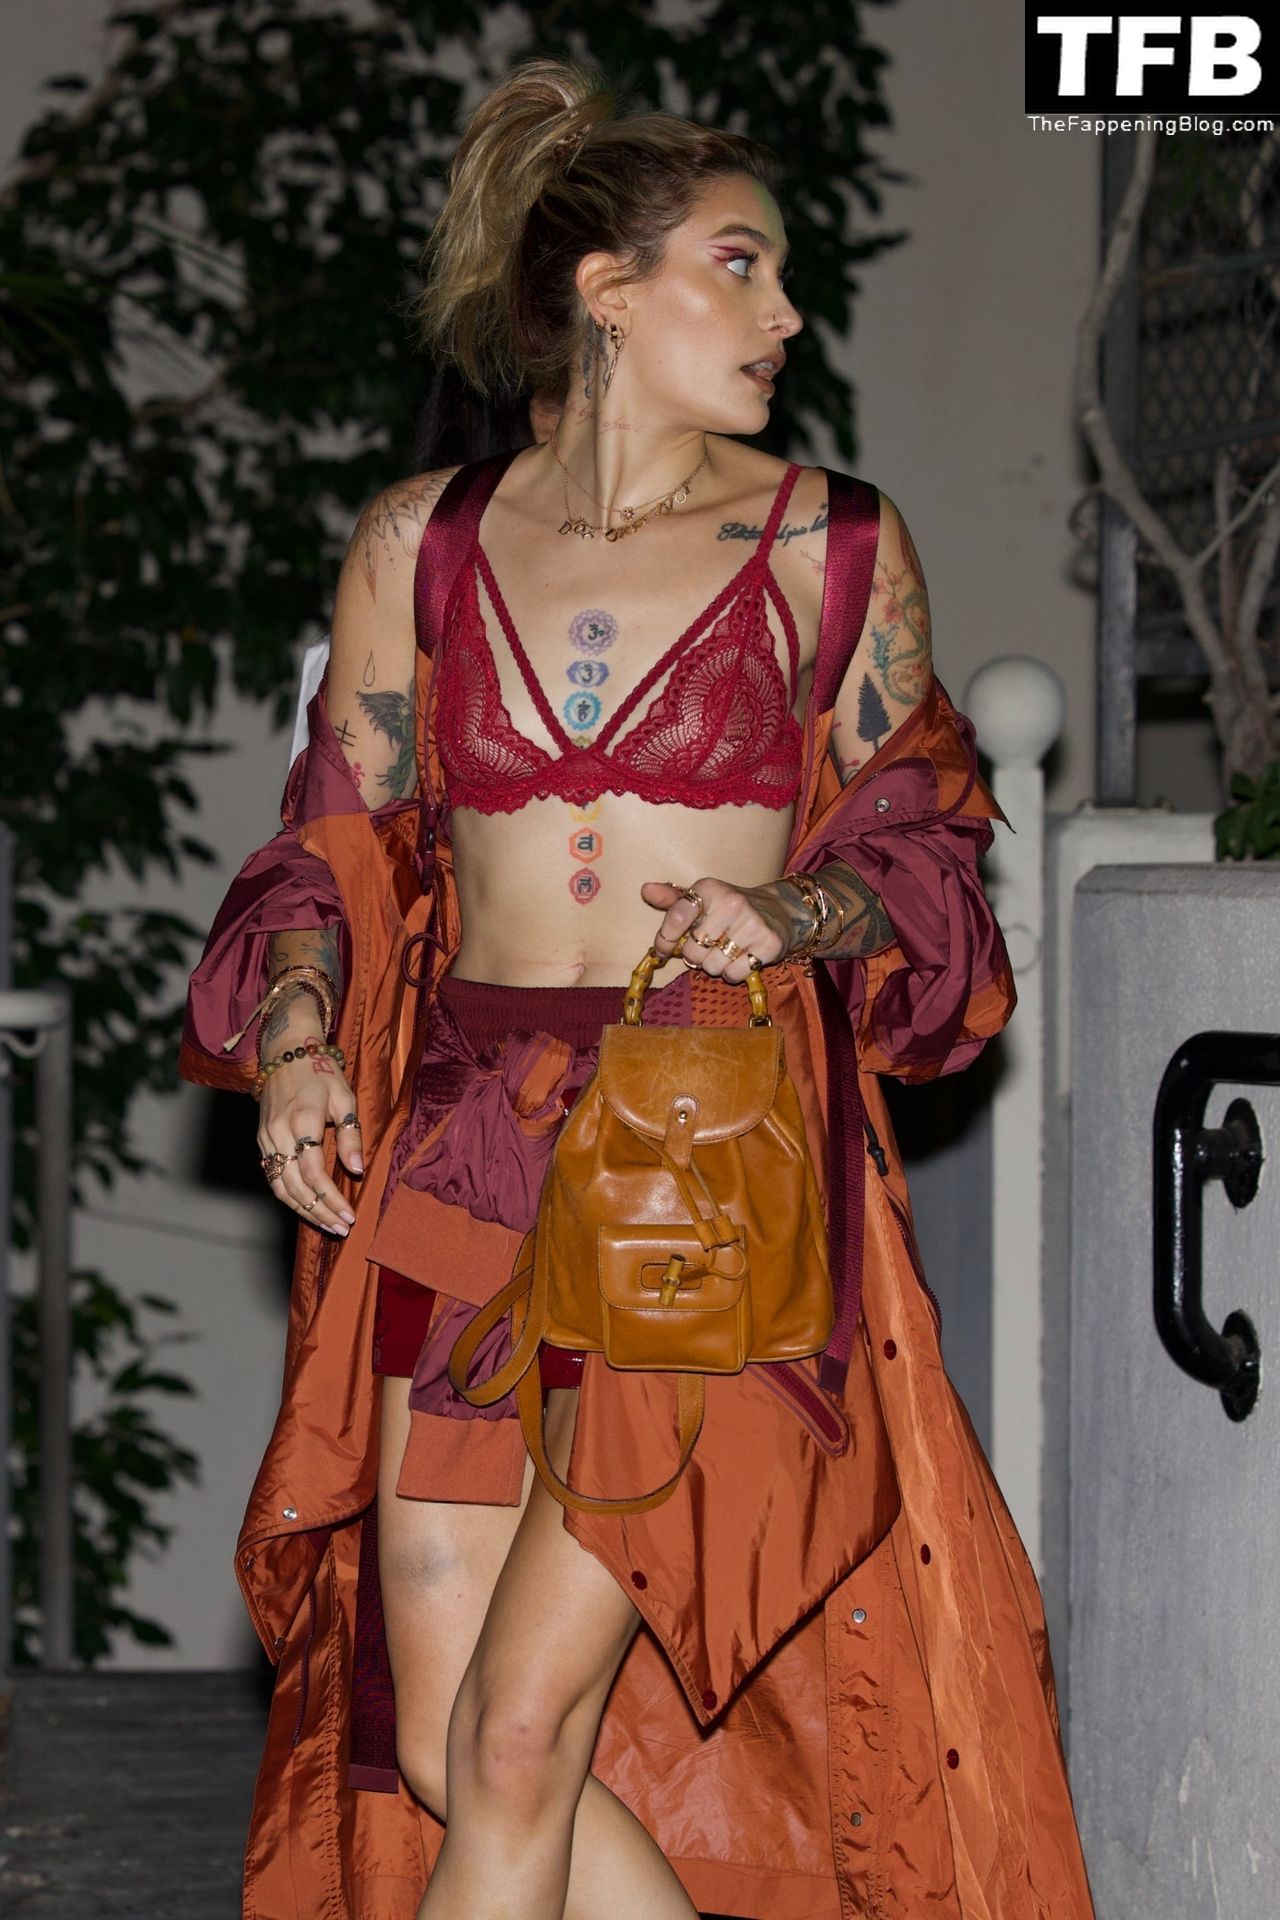 Paris Jackson See Through Nudity The Fappening Blog 28 - Paris Jackson Flashes Her Nude Tits Wearing a See-Through Bra in WeHo (34 Photos)